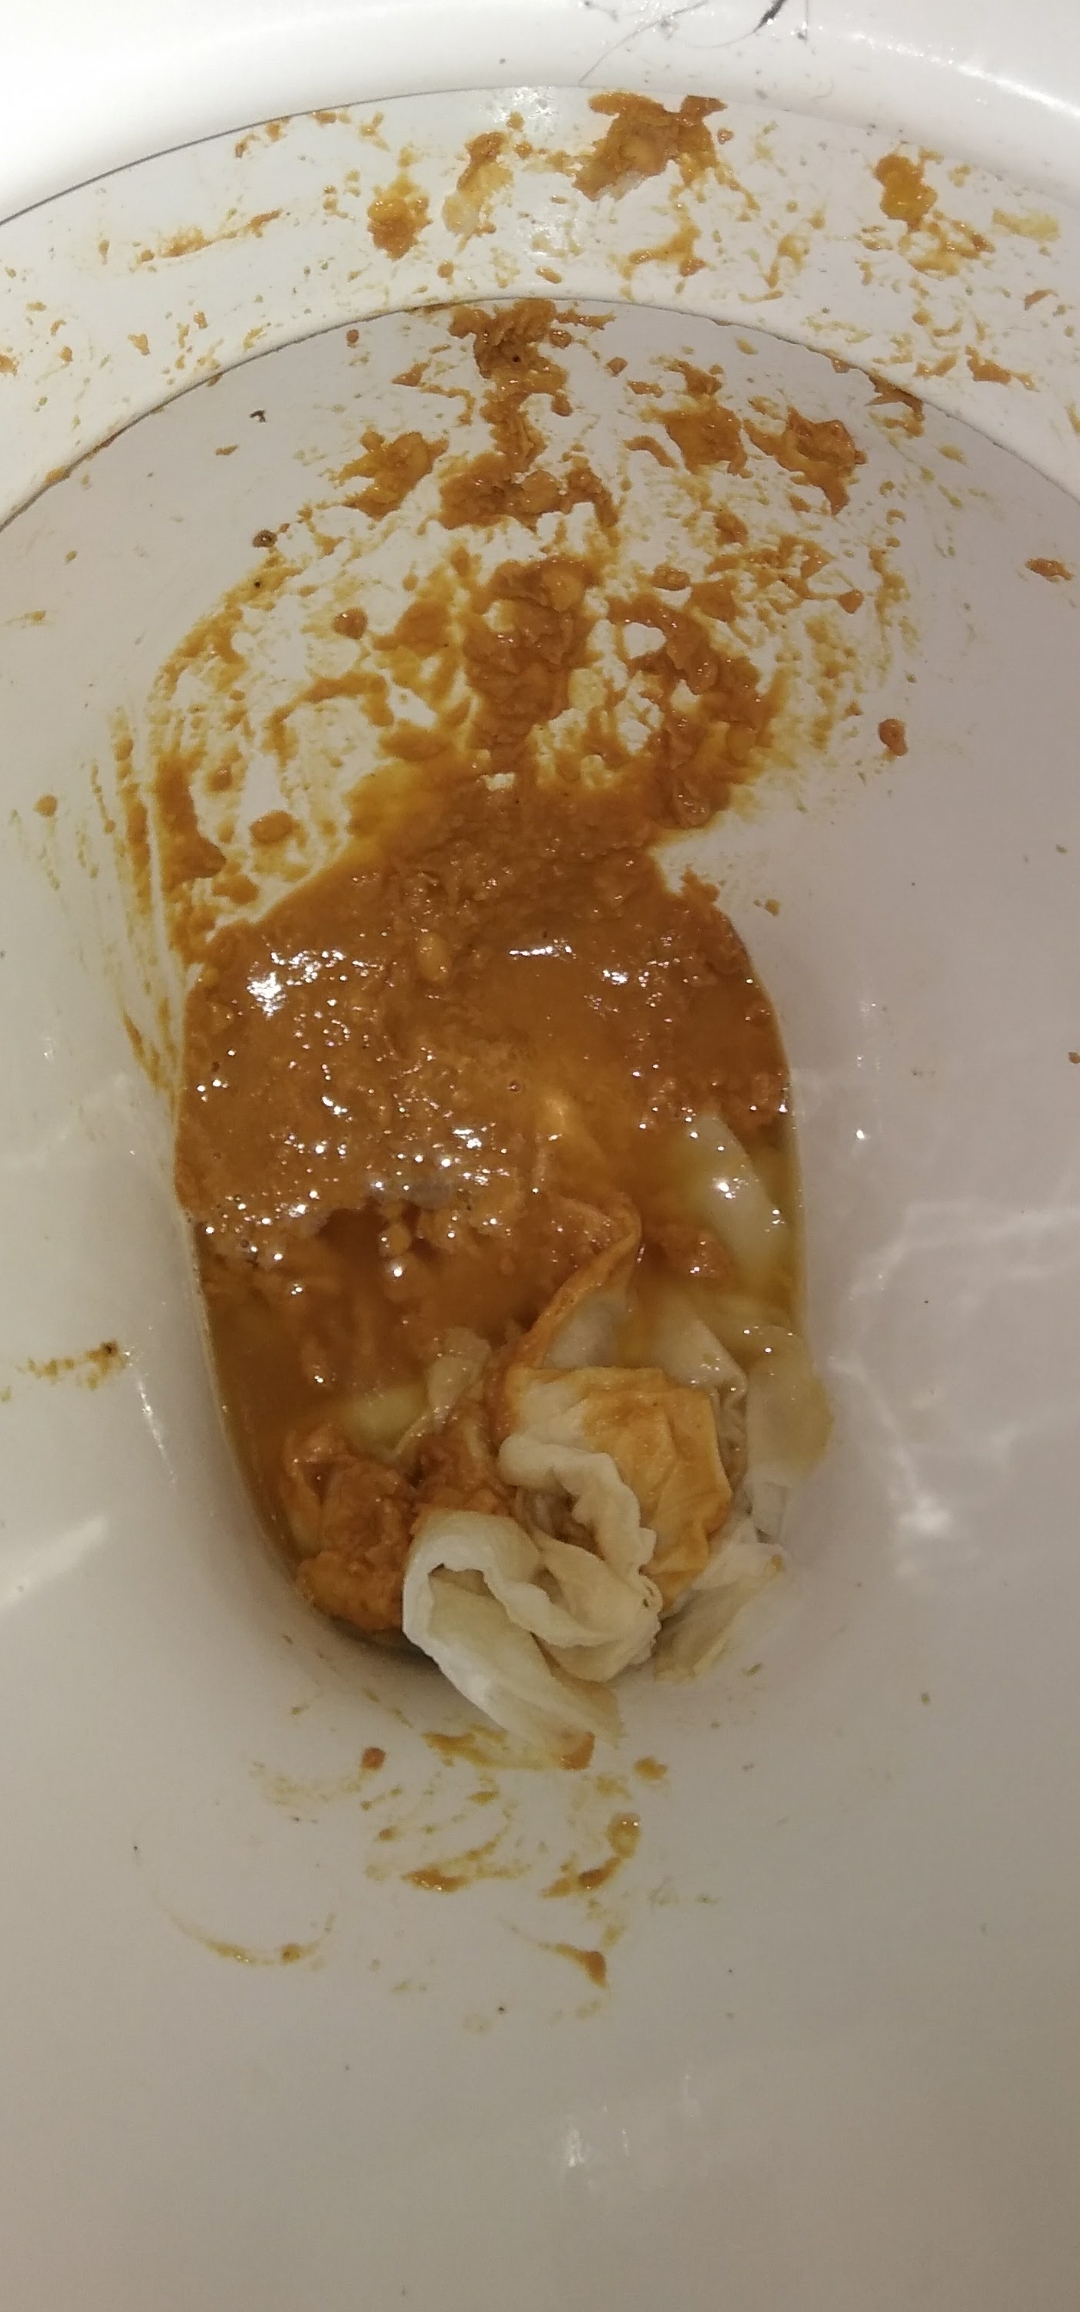 Desperate bubble guts shit on my mates toilet earlier